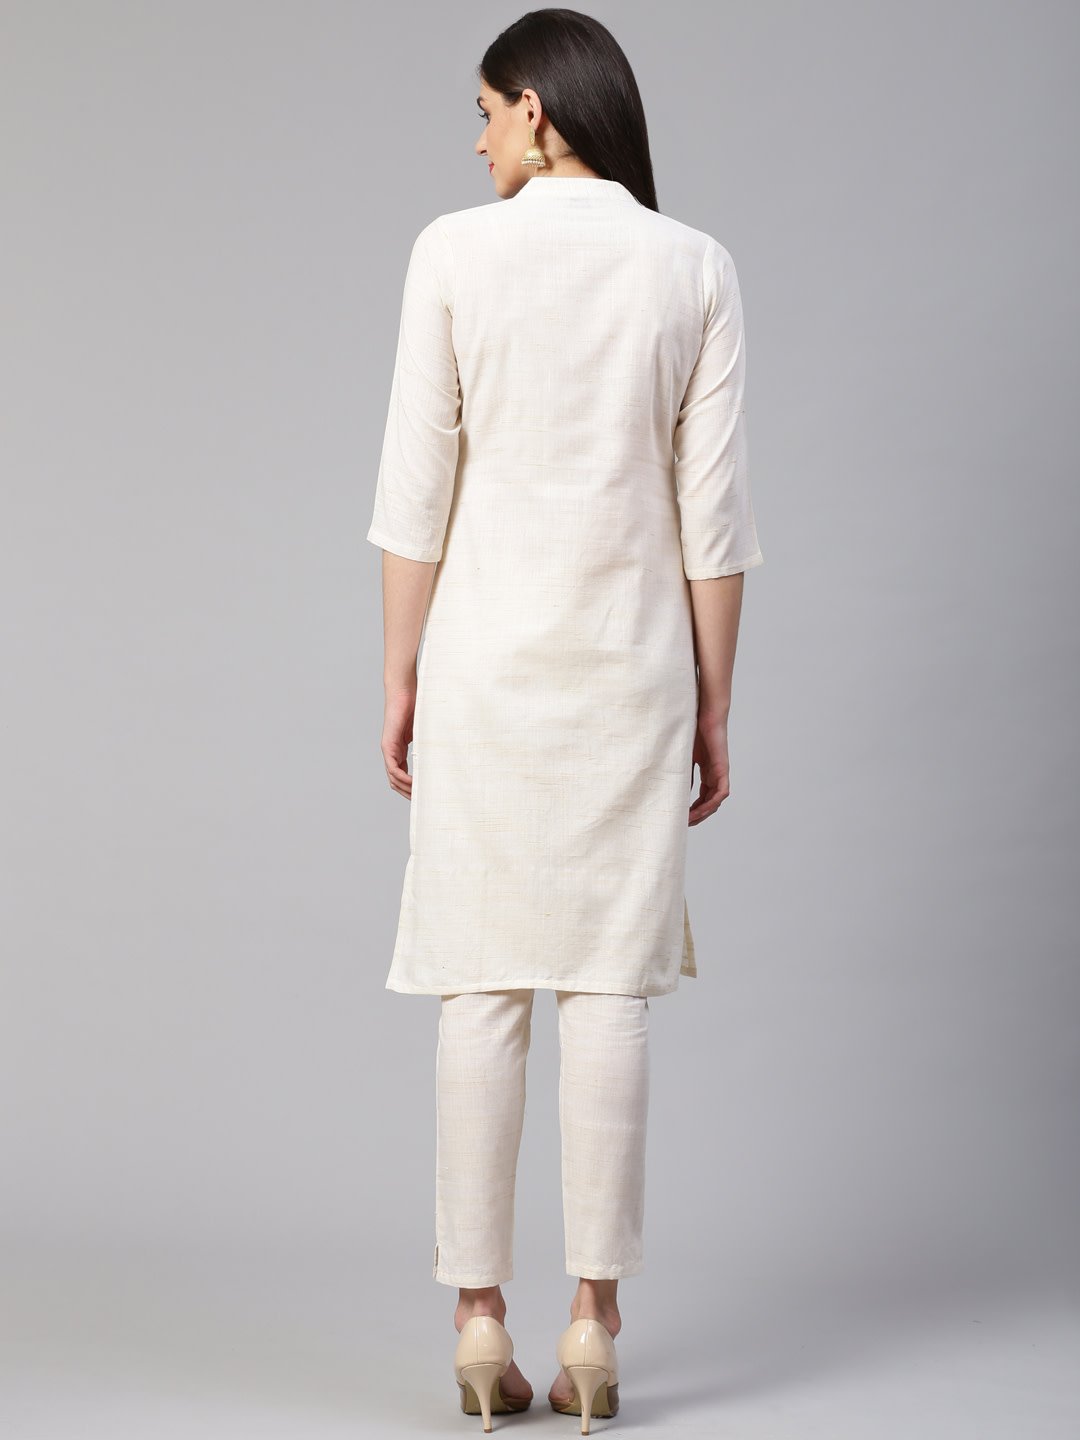 Women's Off White Woven Design Kurta with Trousers - Jompers